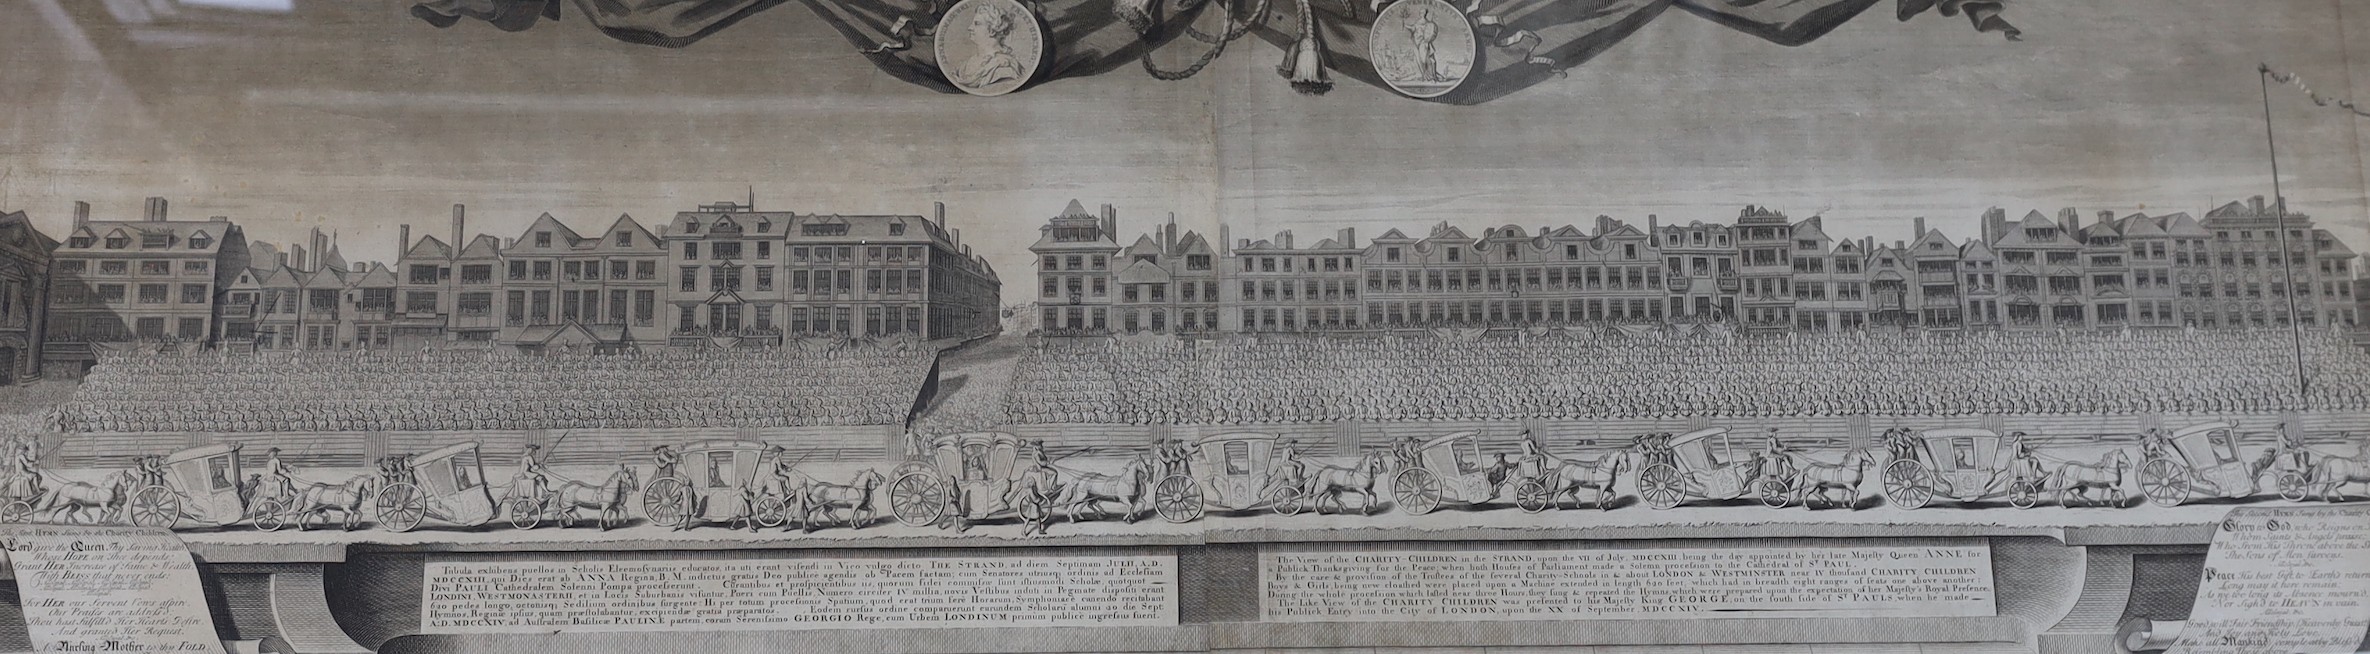 George Vertue, engraving, ‘View of the charity children in The Strand … 1715’, 39 x 128cm and a Buck engraving, South West Prospect of the City of Lichfield, 32 x 80cm